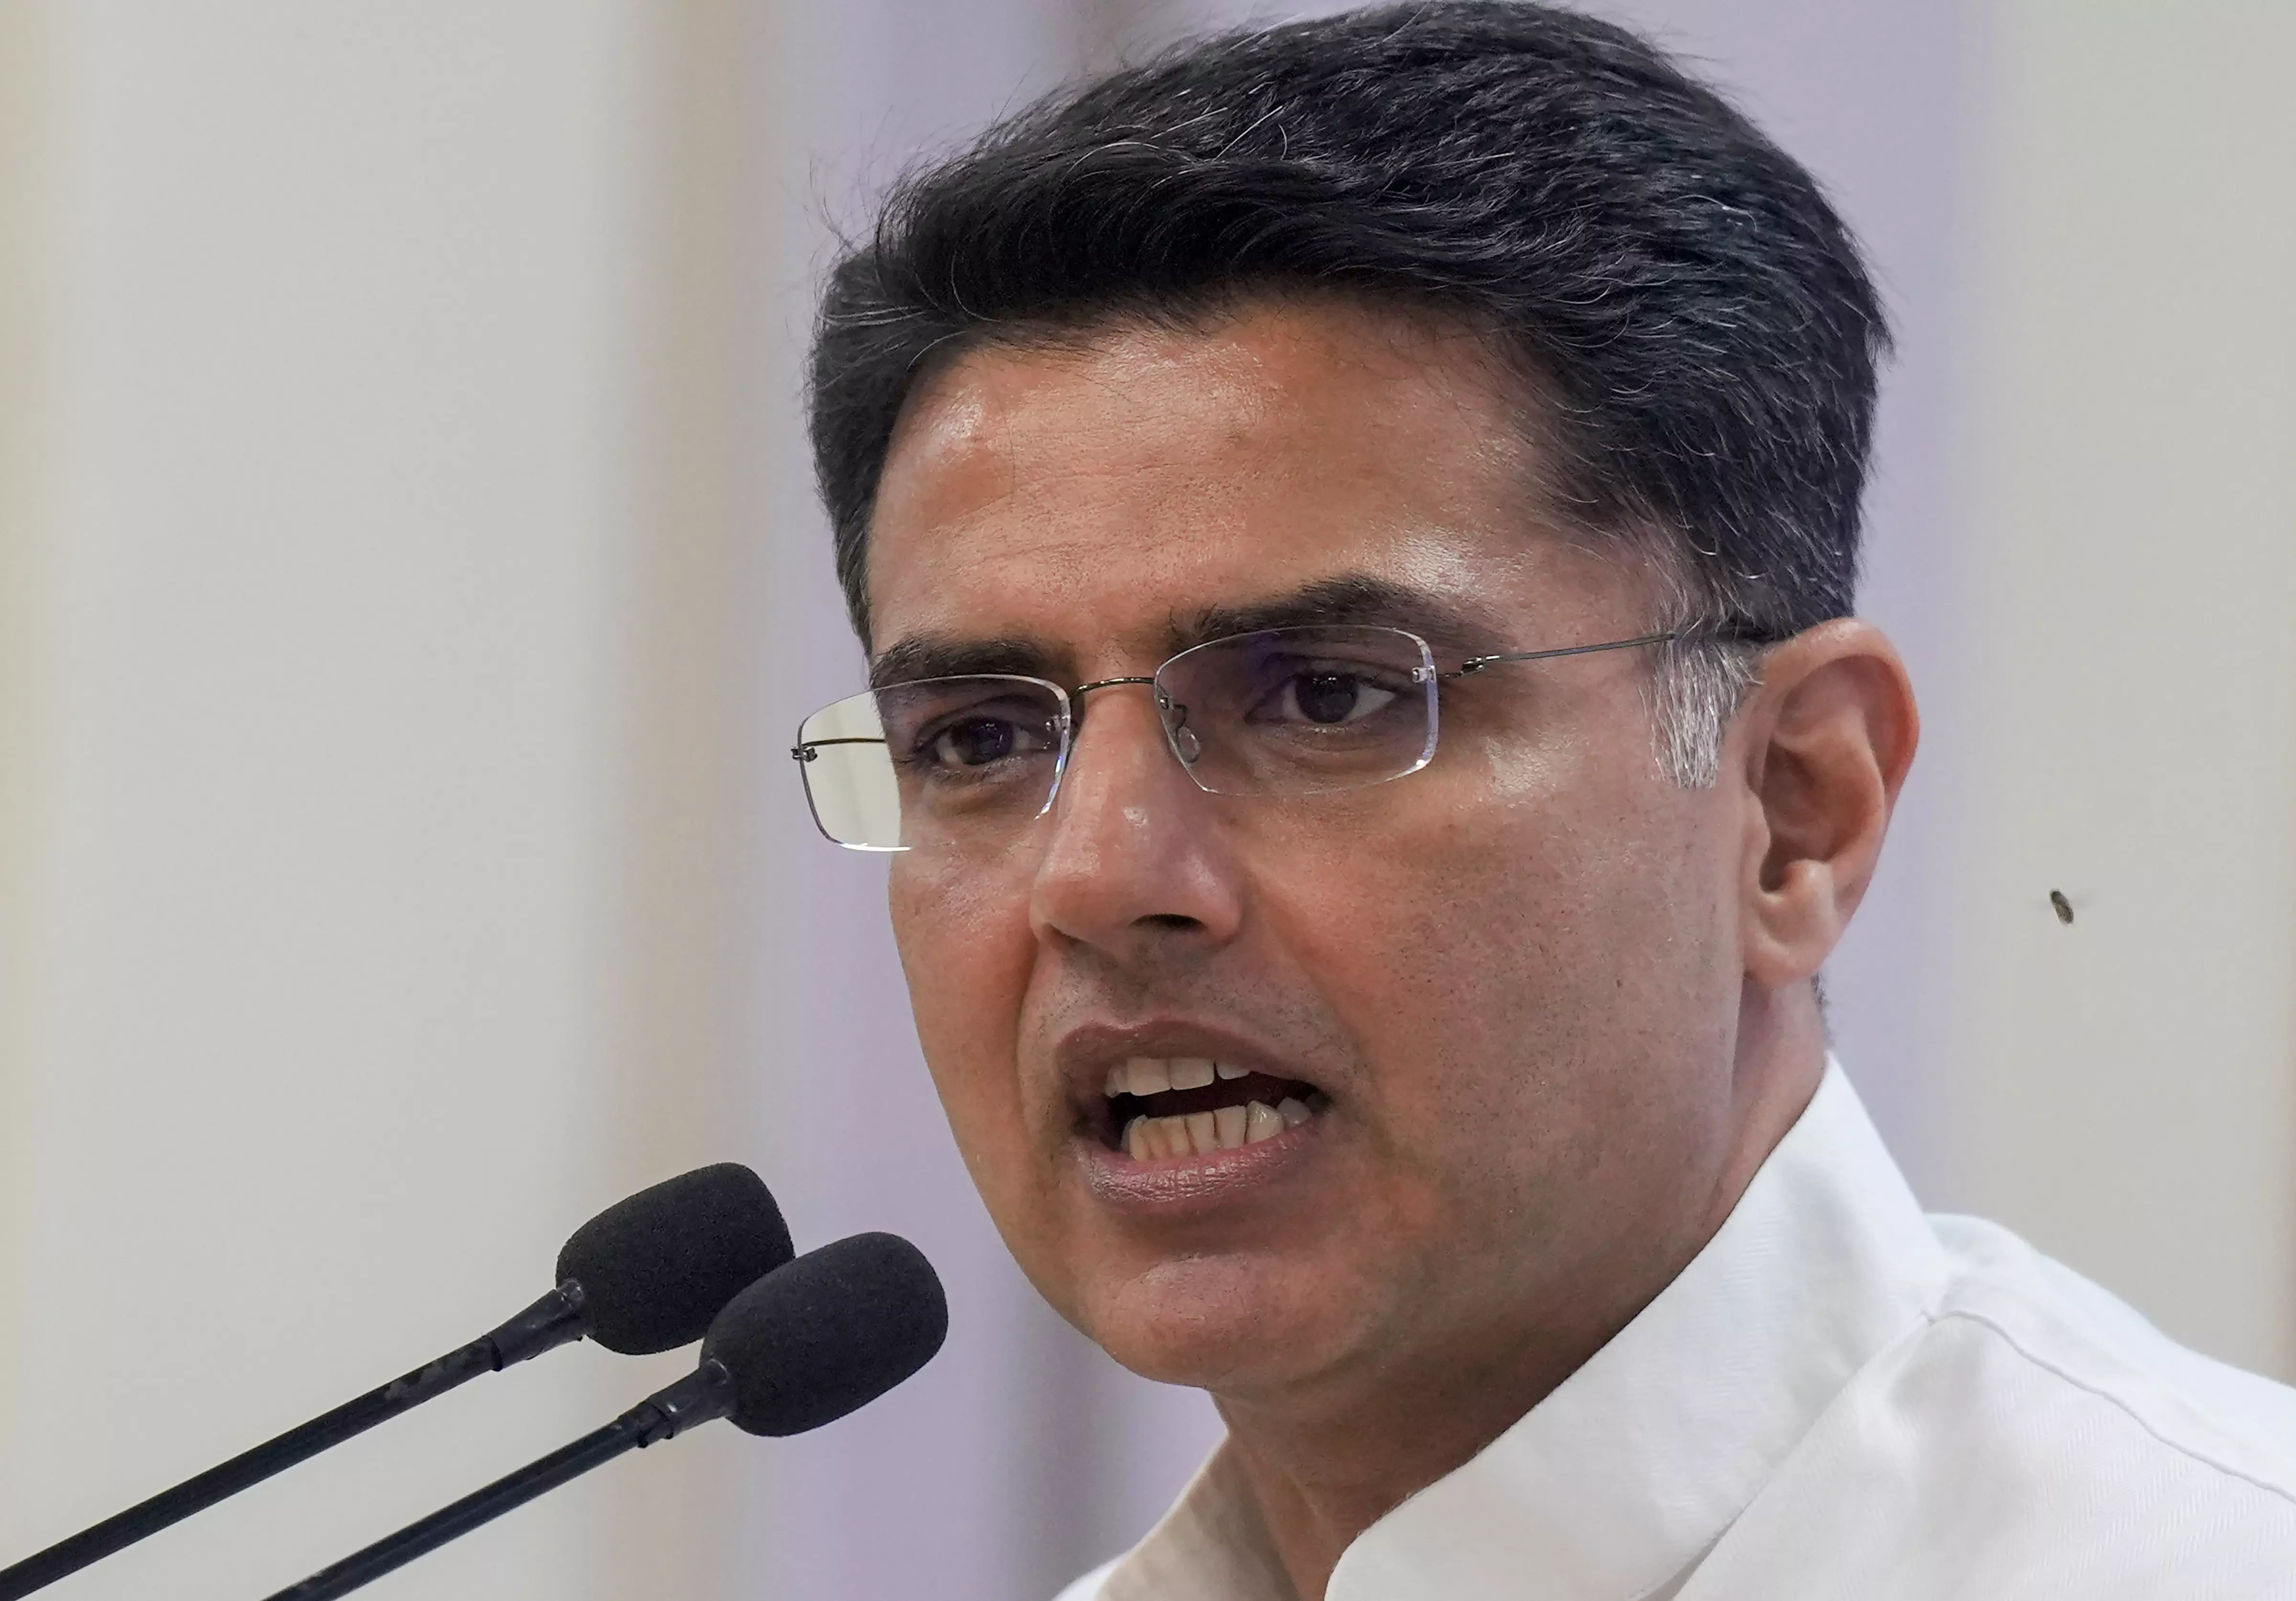 Rajasthan polls: High Command will decide who will lead govt after we get majority, says Sachin Pilot